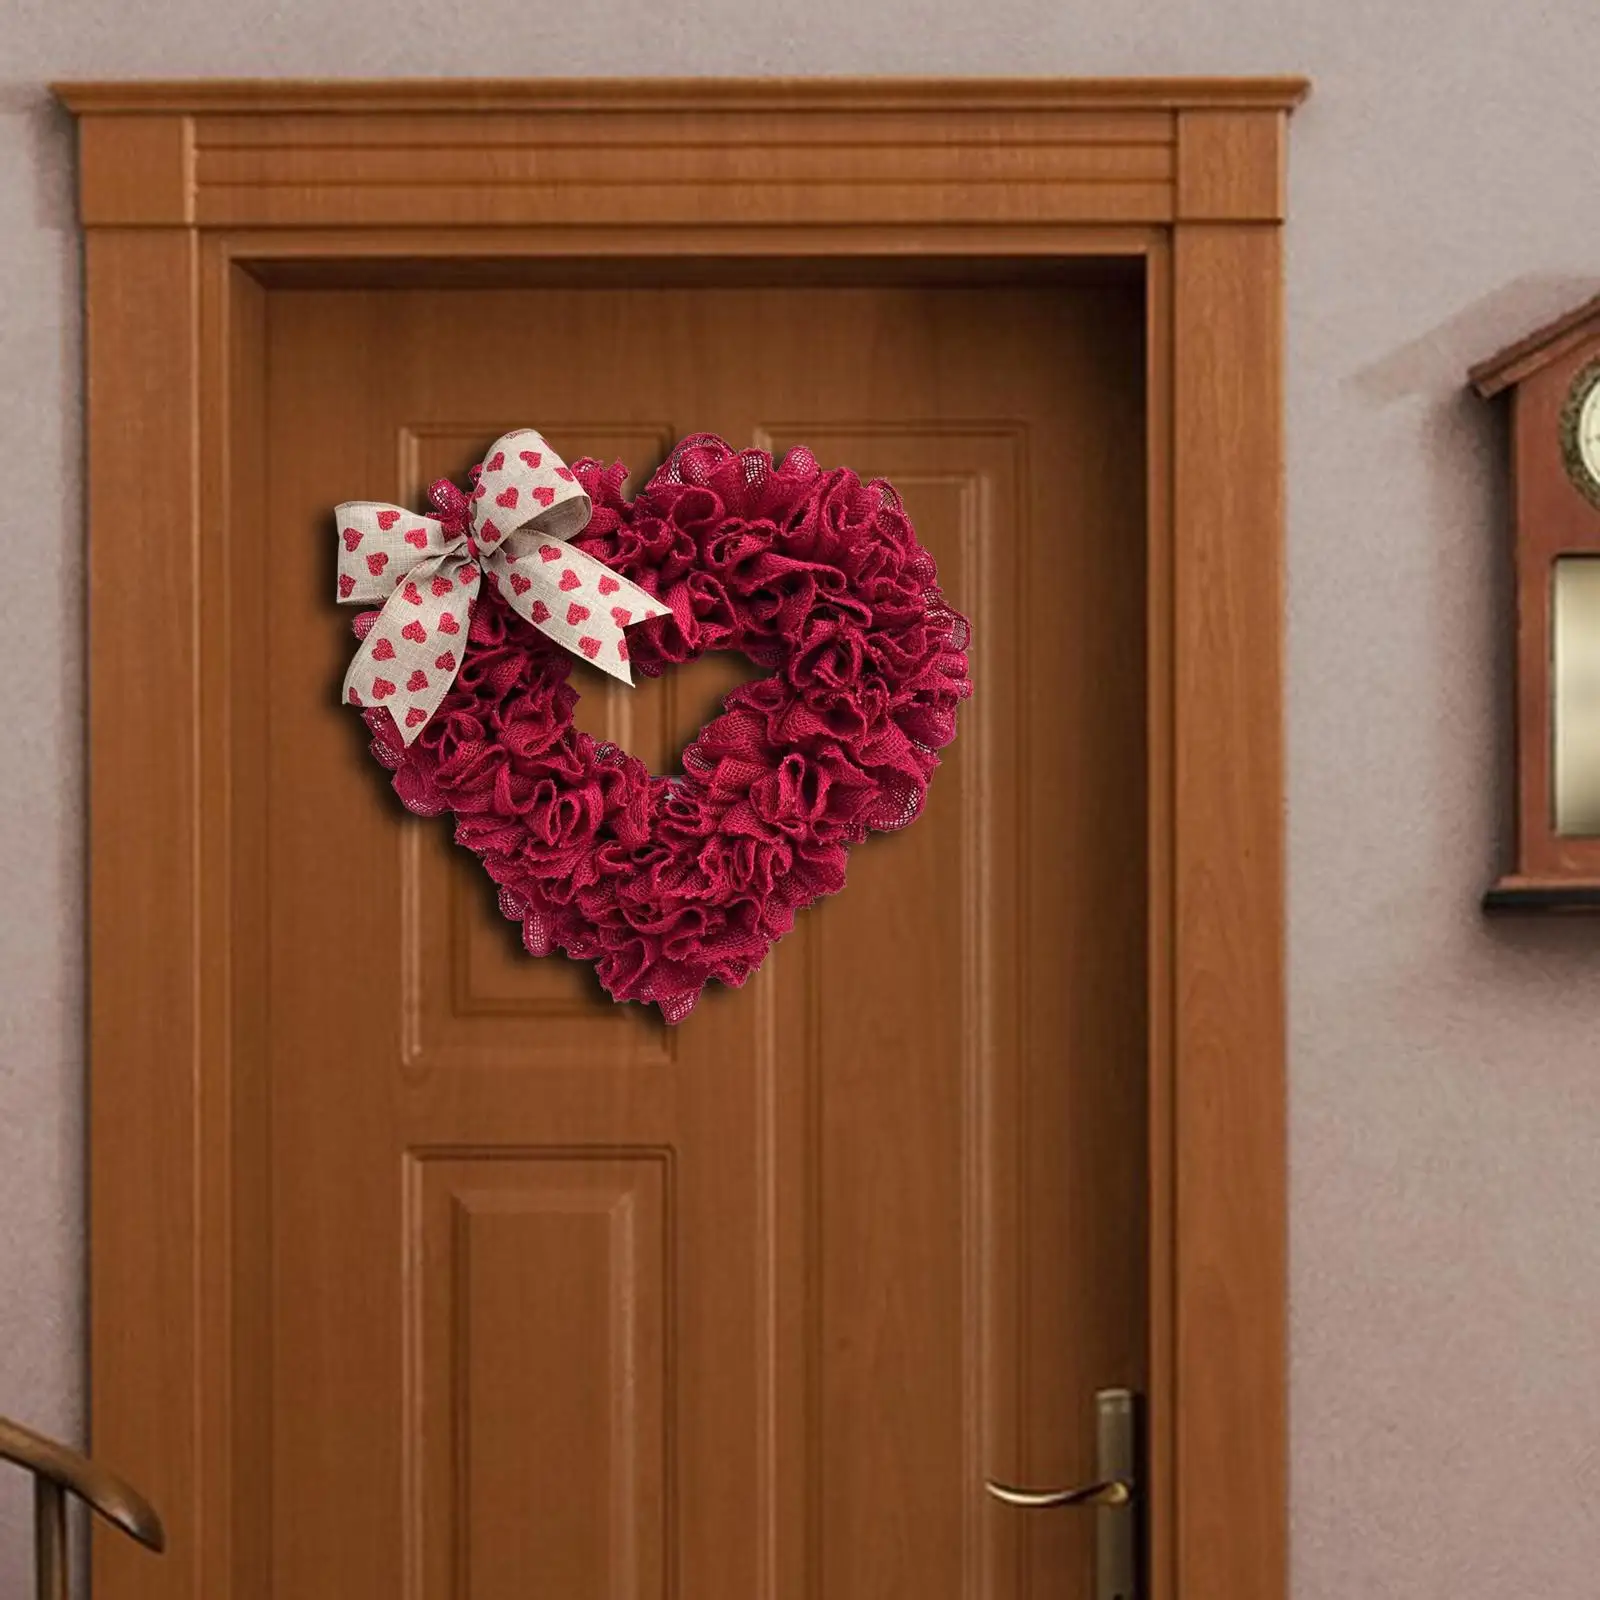 40cm Valentine Wreath Door Hanging Heart Shaped Wreaths Decorative with  Bowknot Pendant for Engagement Anniversary Home Decor